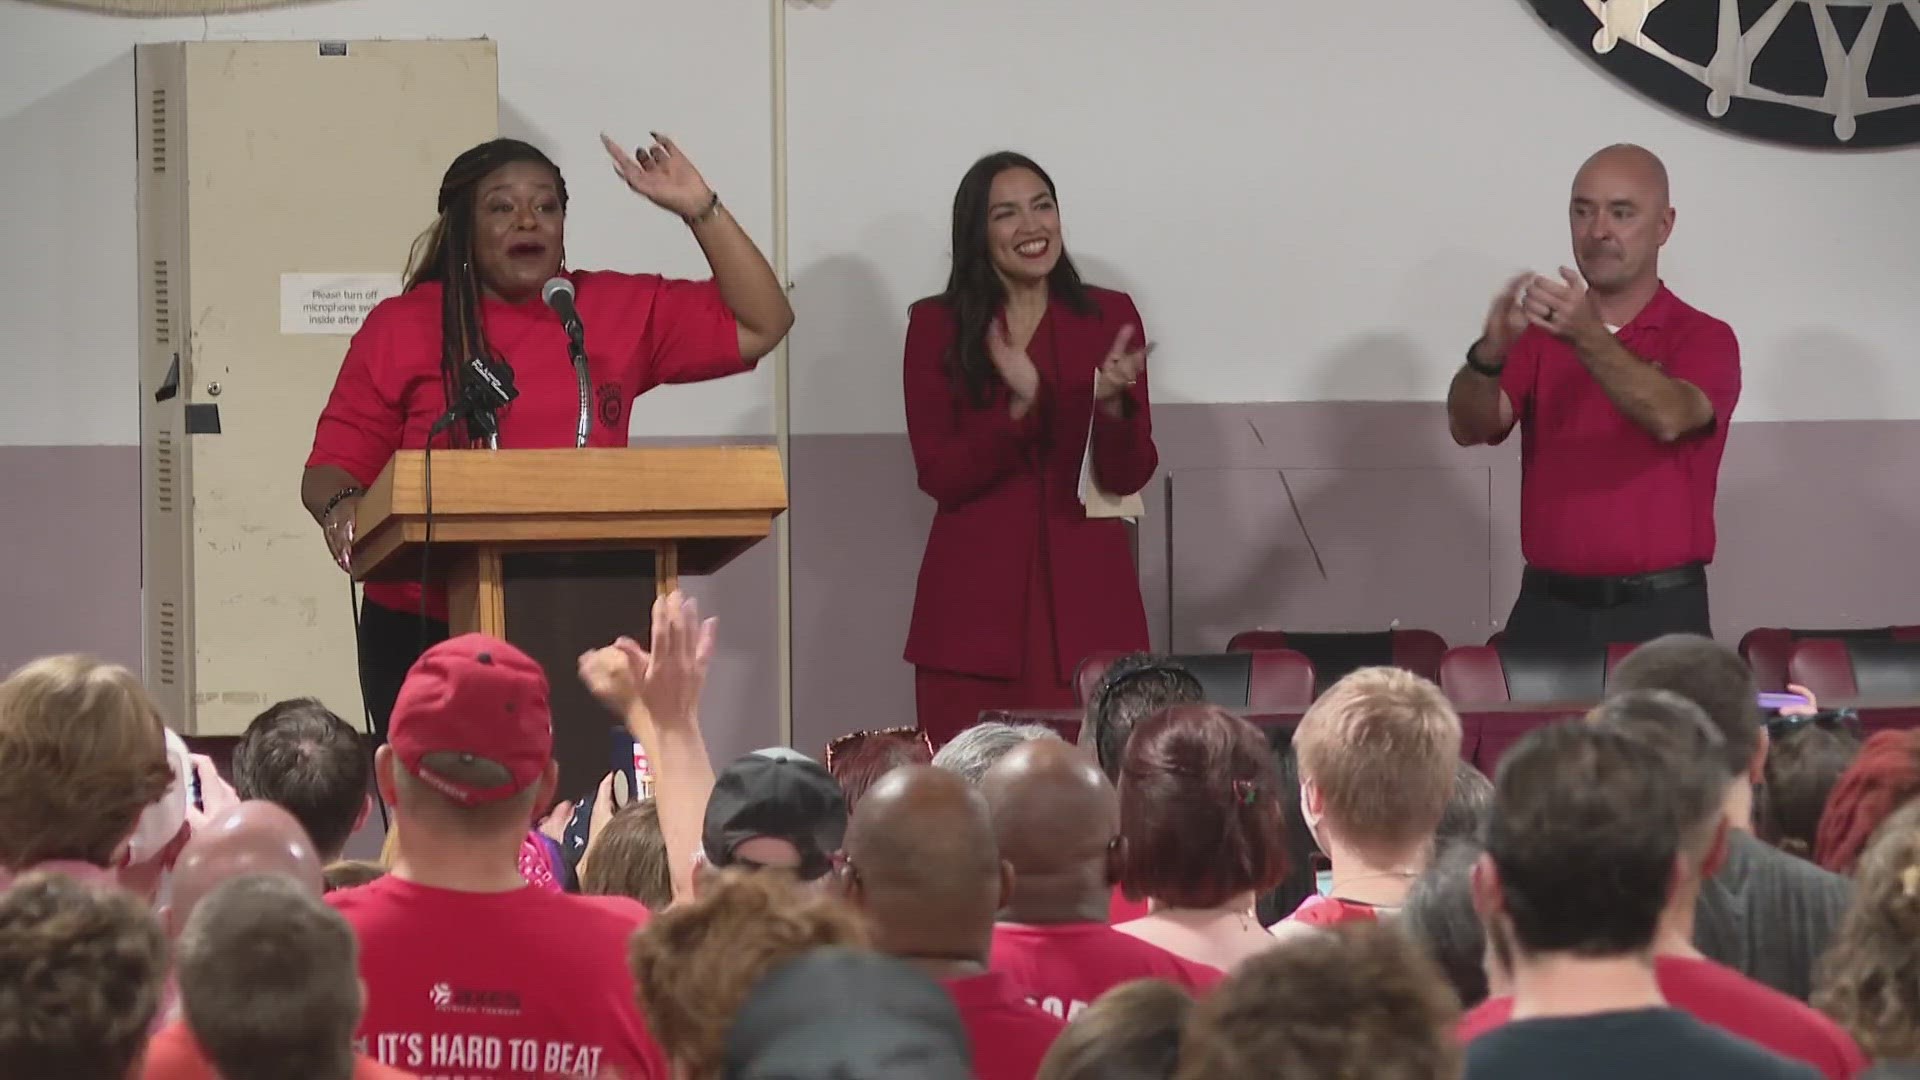 The two congresswomen showed up to support striking workers' demands. The strike was recently expanded to numerous states.